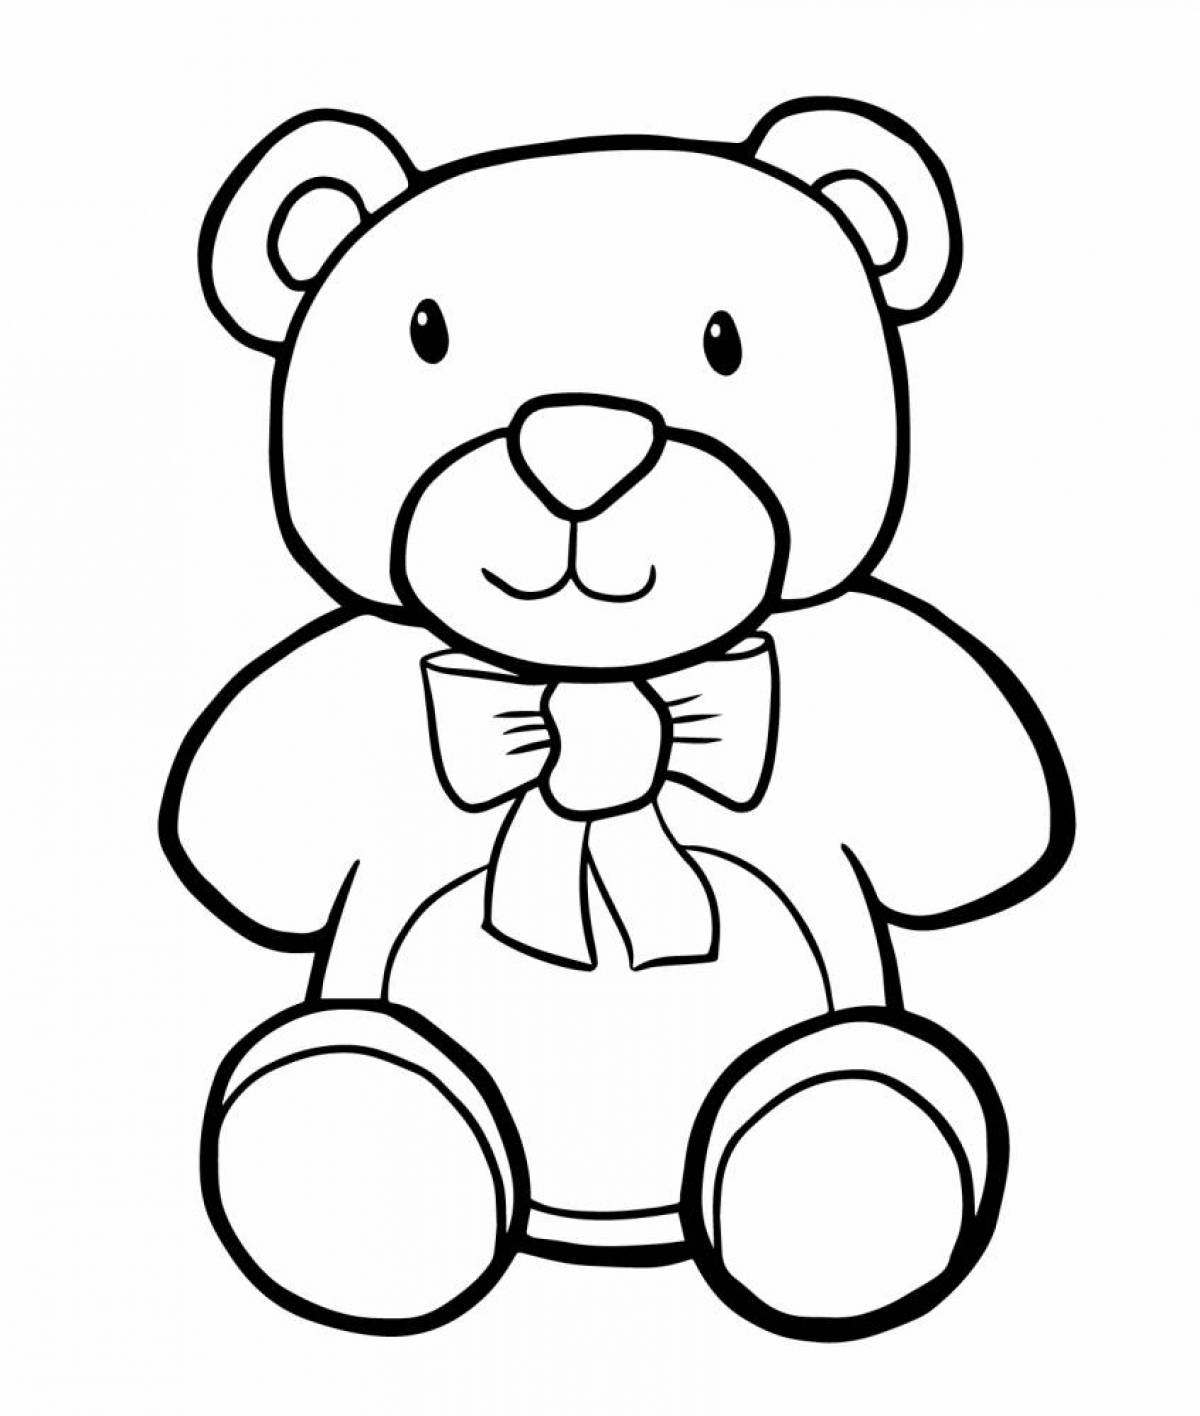 Smiling bear coloring page